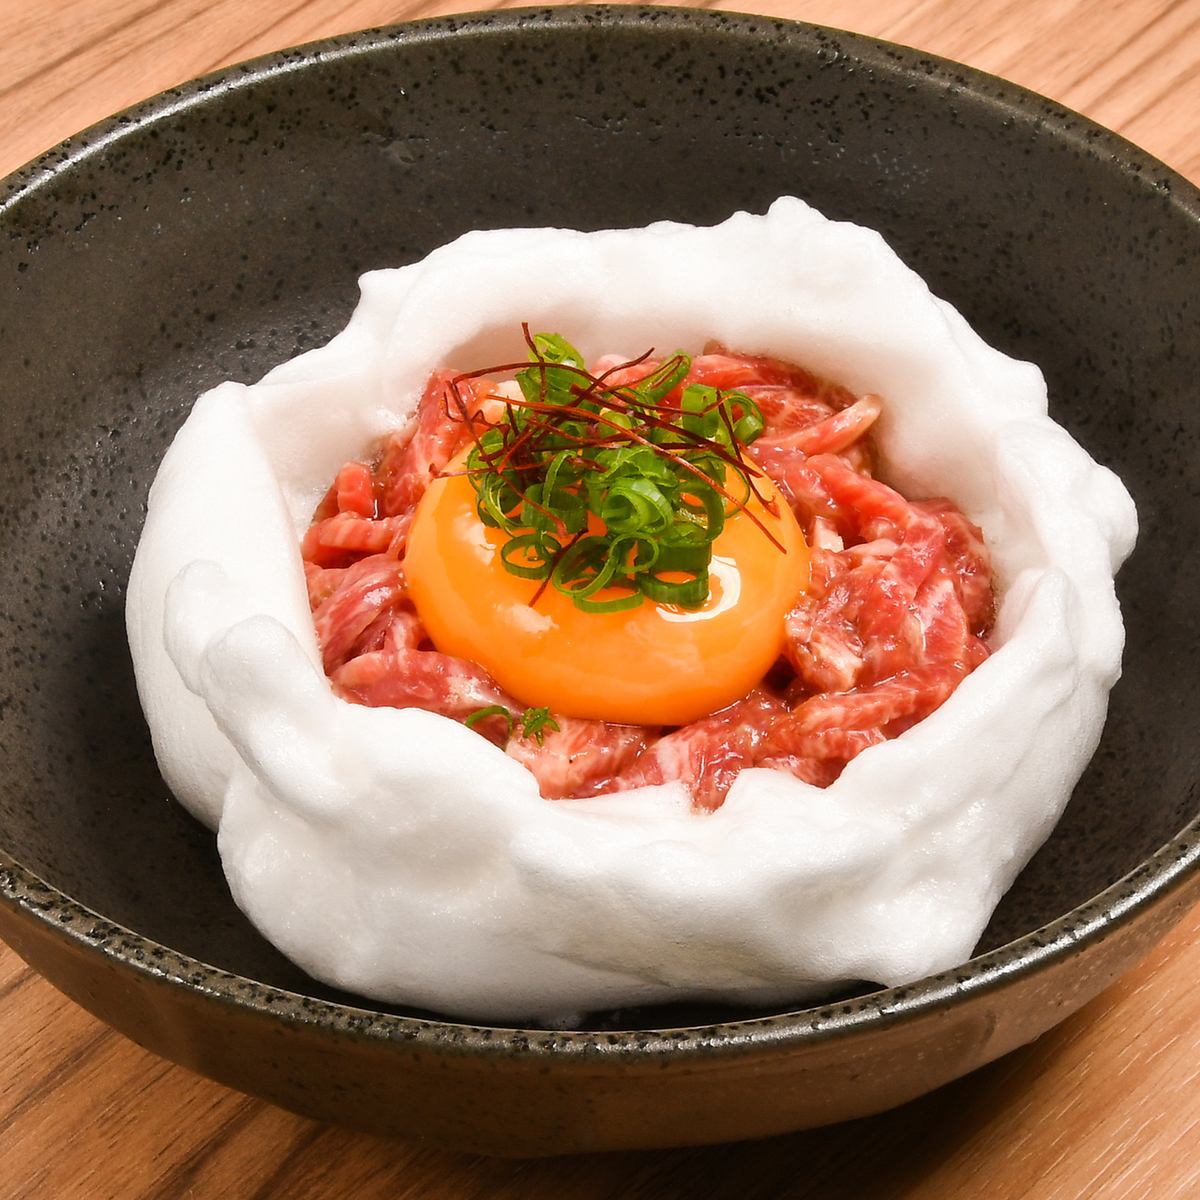 Easy access, within a 5-minute walk from Shin-Fukushima Station on the JR Tozai Line★Yakiniku restaurant where you can enjoy high-quality wagyu beef